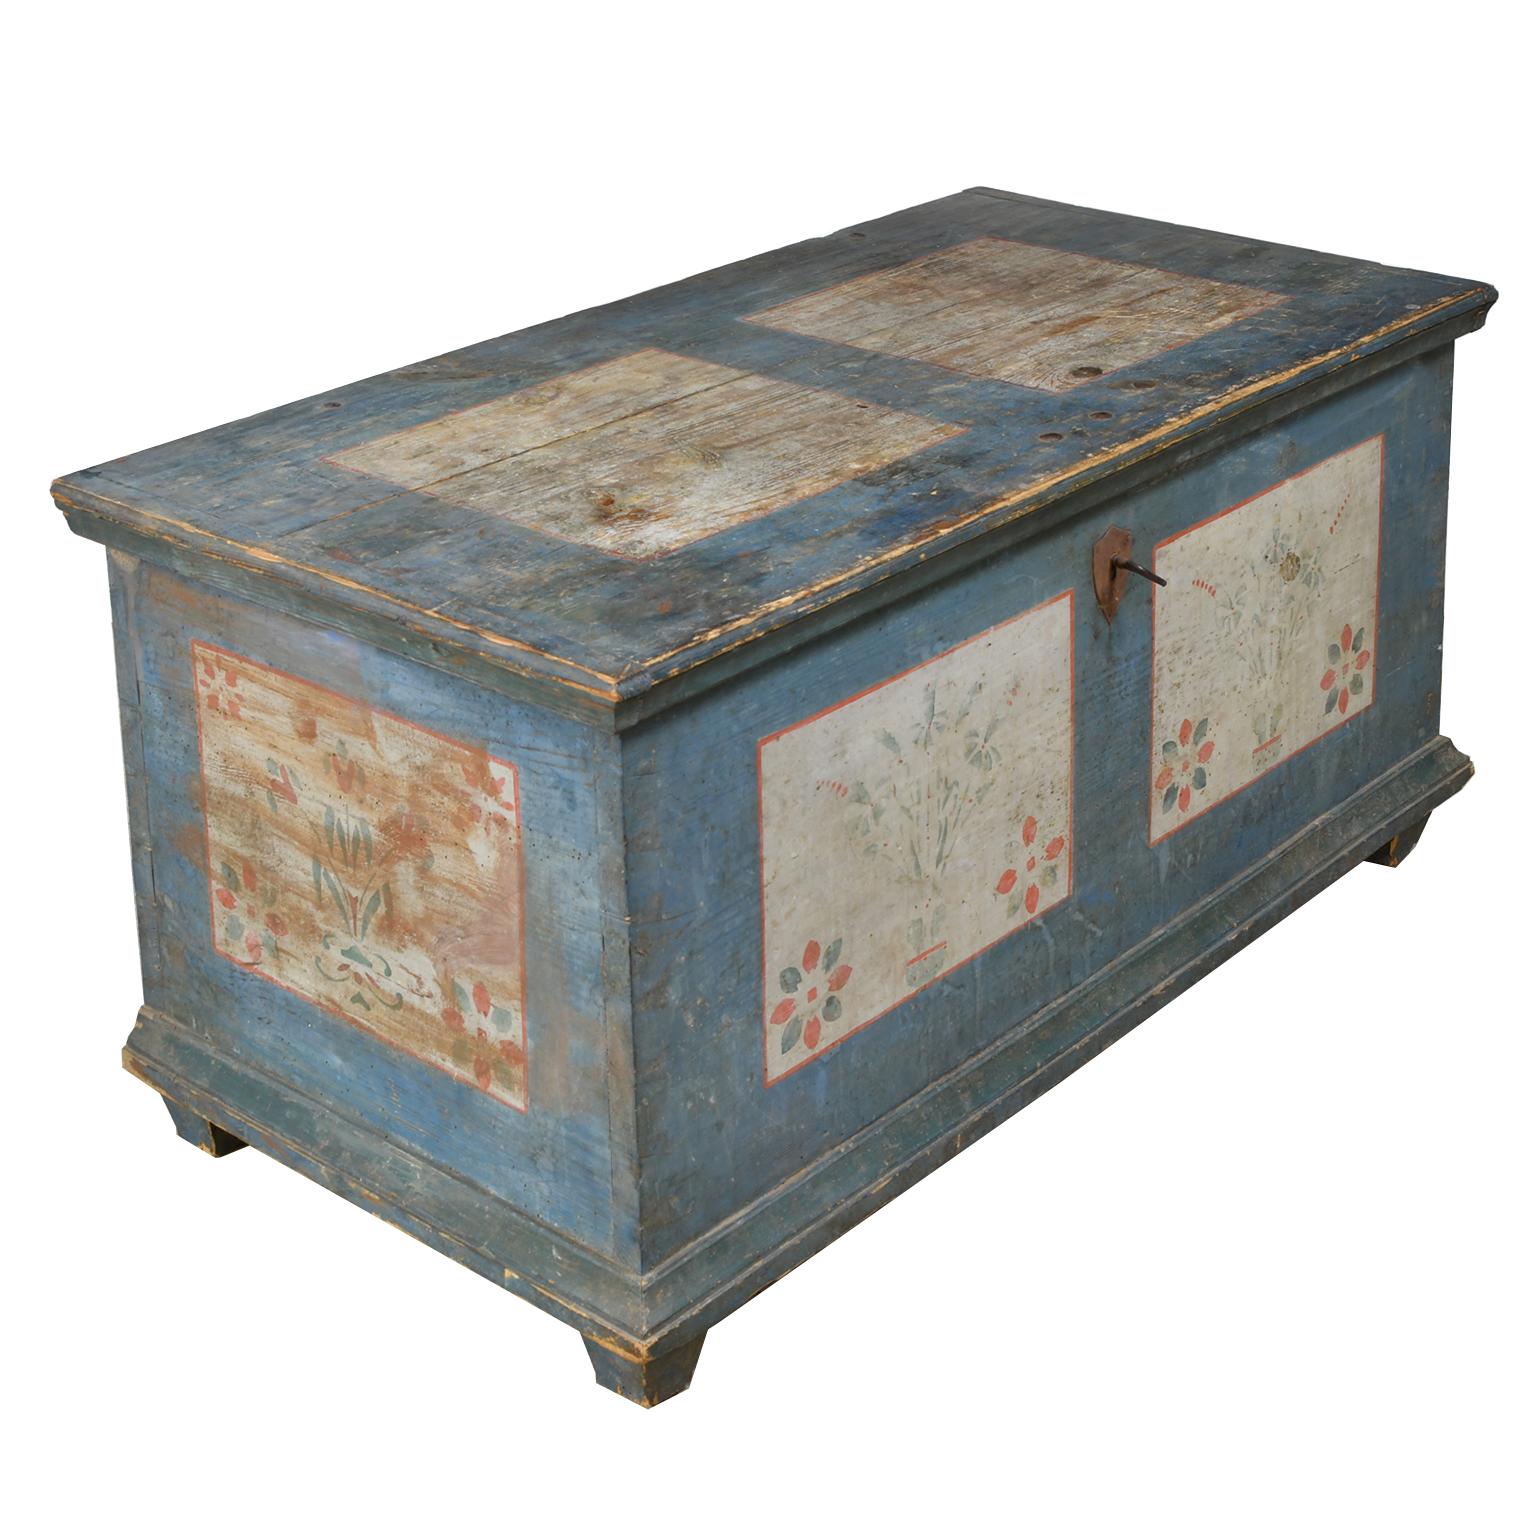 18th Century Dowry Chest with Original Blue Paint & Floral Design, Northern Europe circa 1780